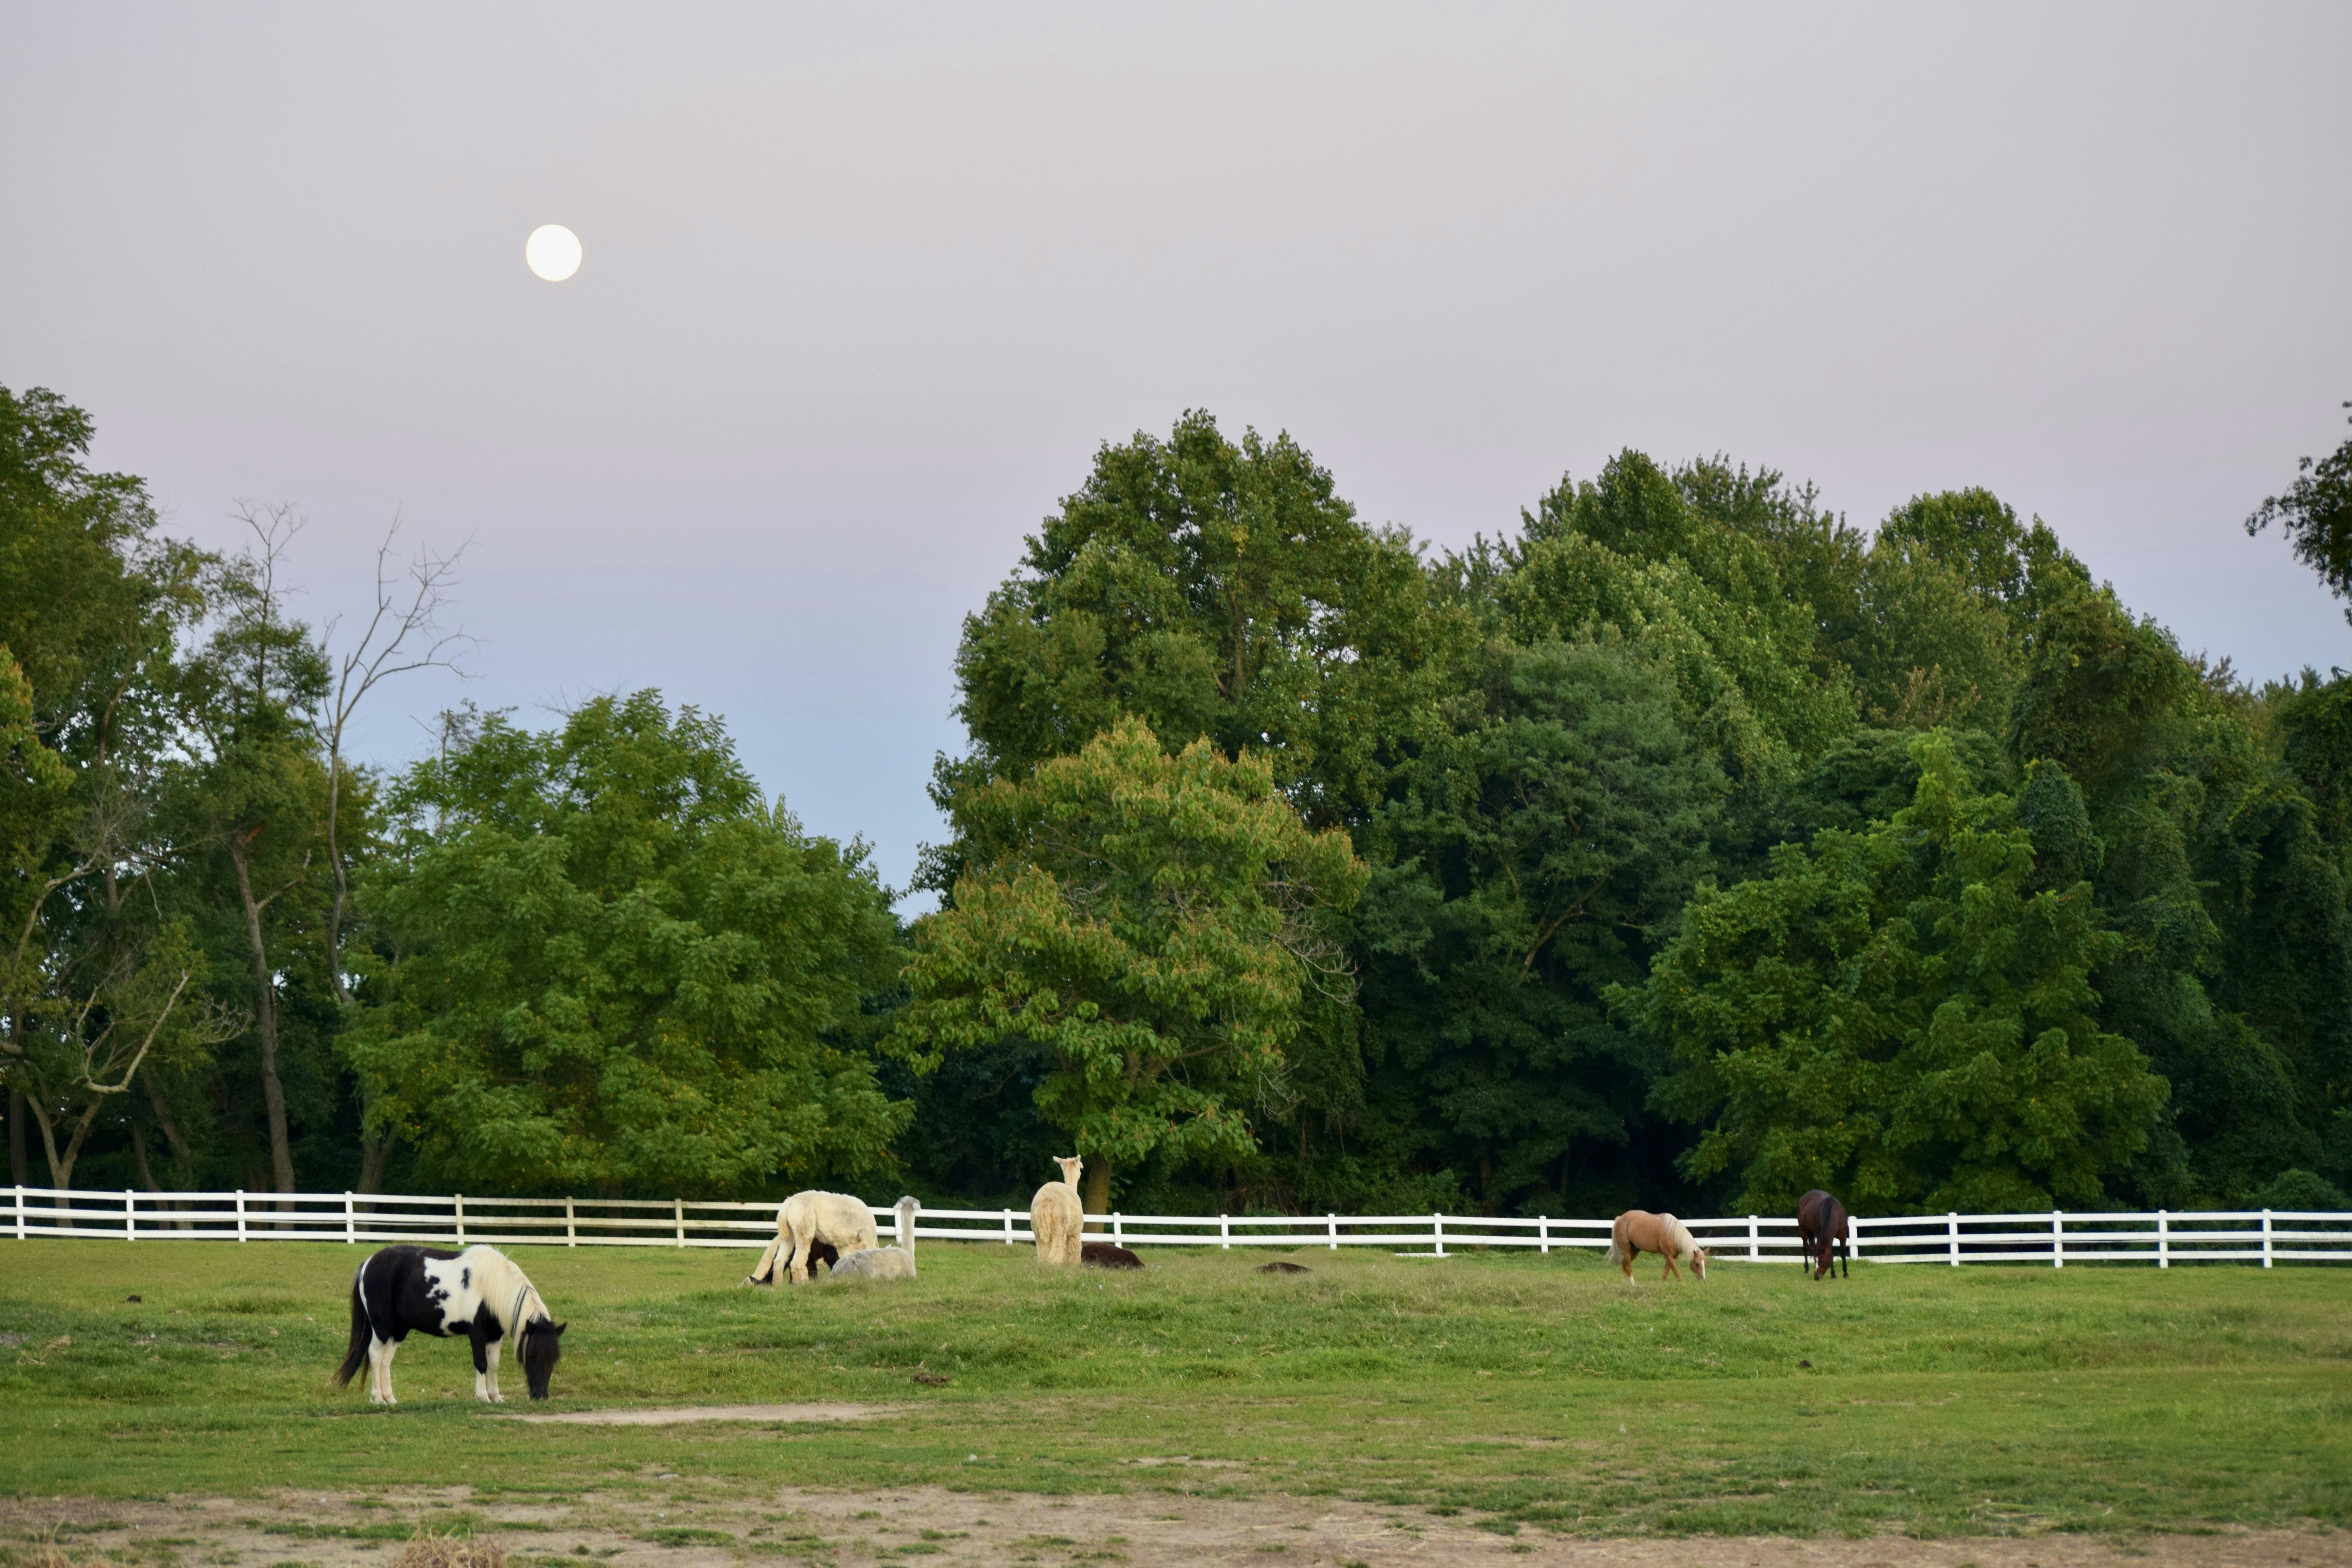 Just some farm animals grazing at Carousel Park in Delaware.